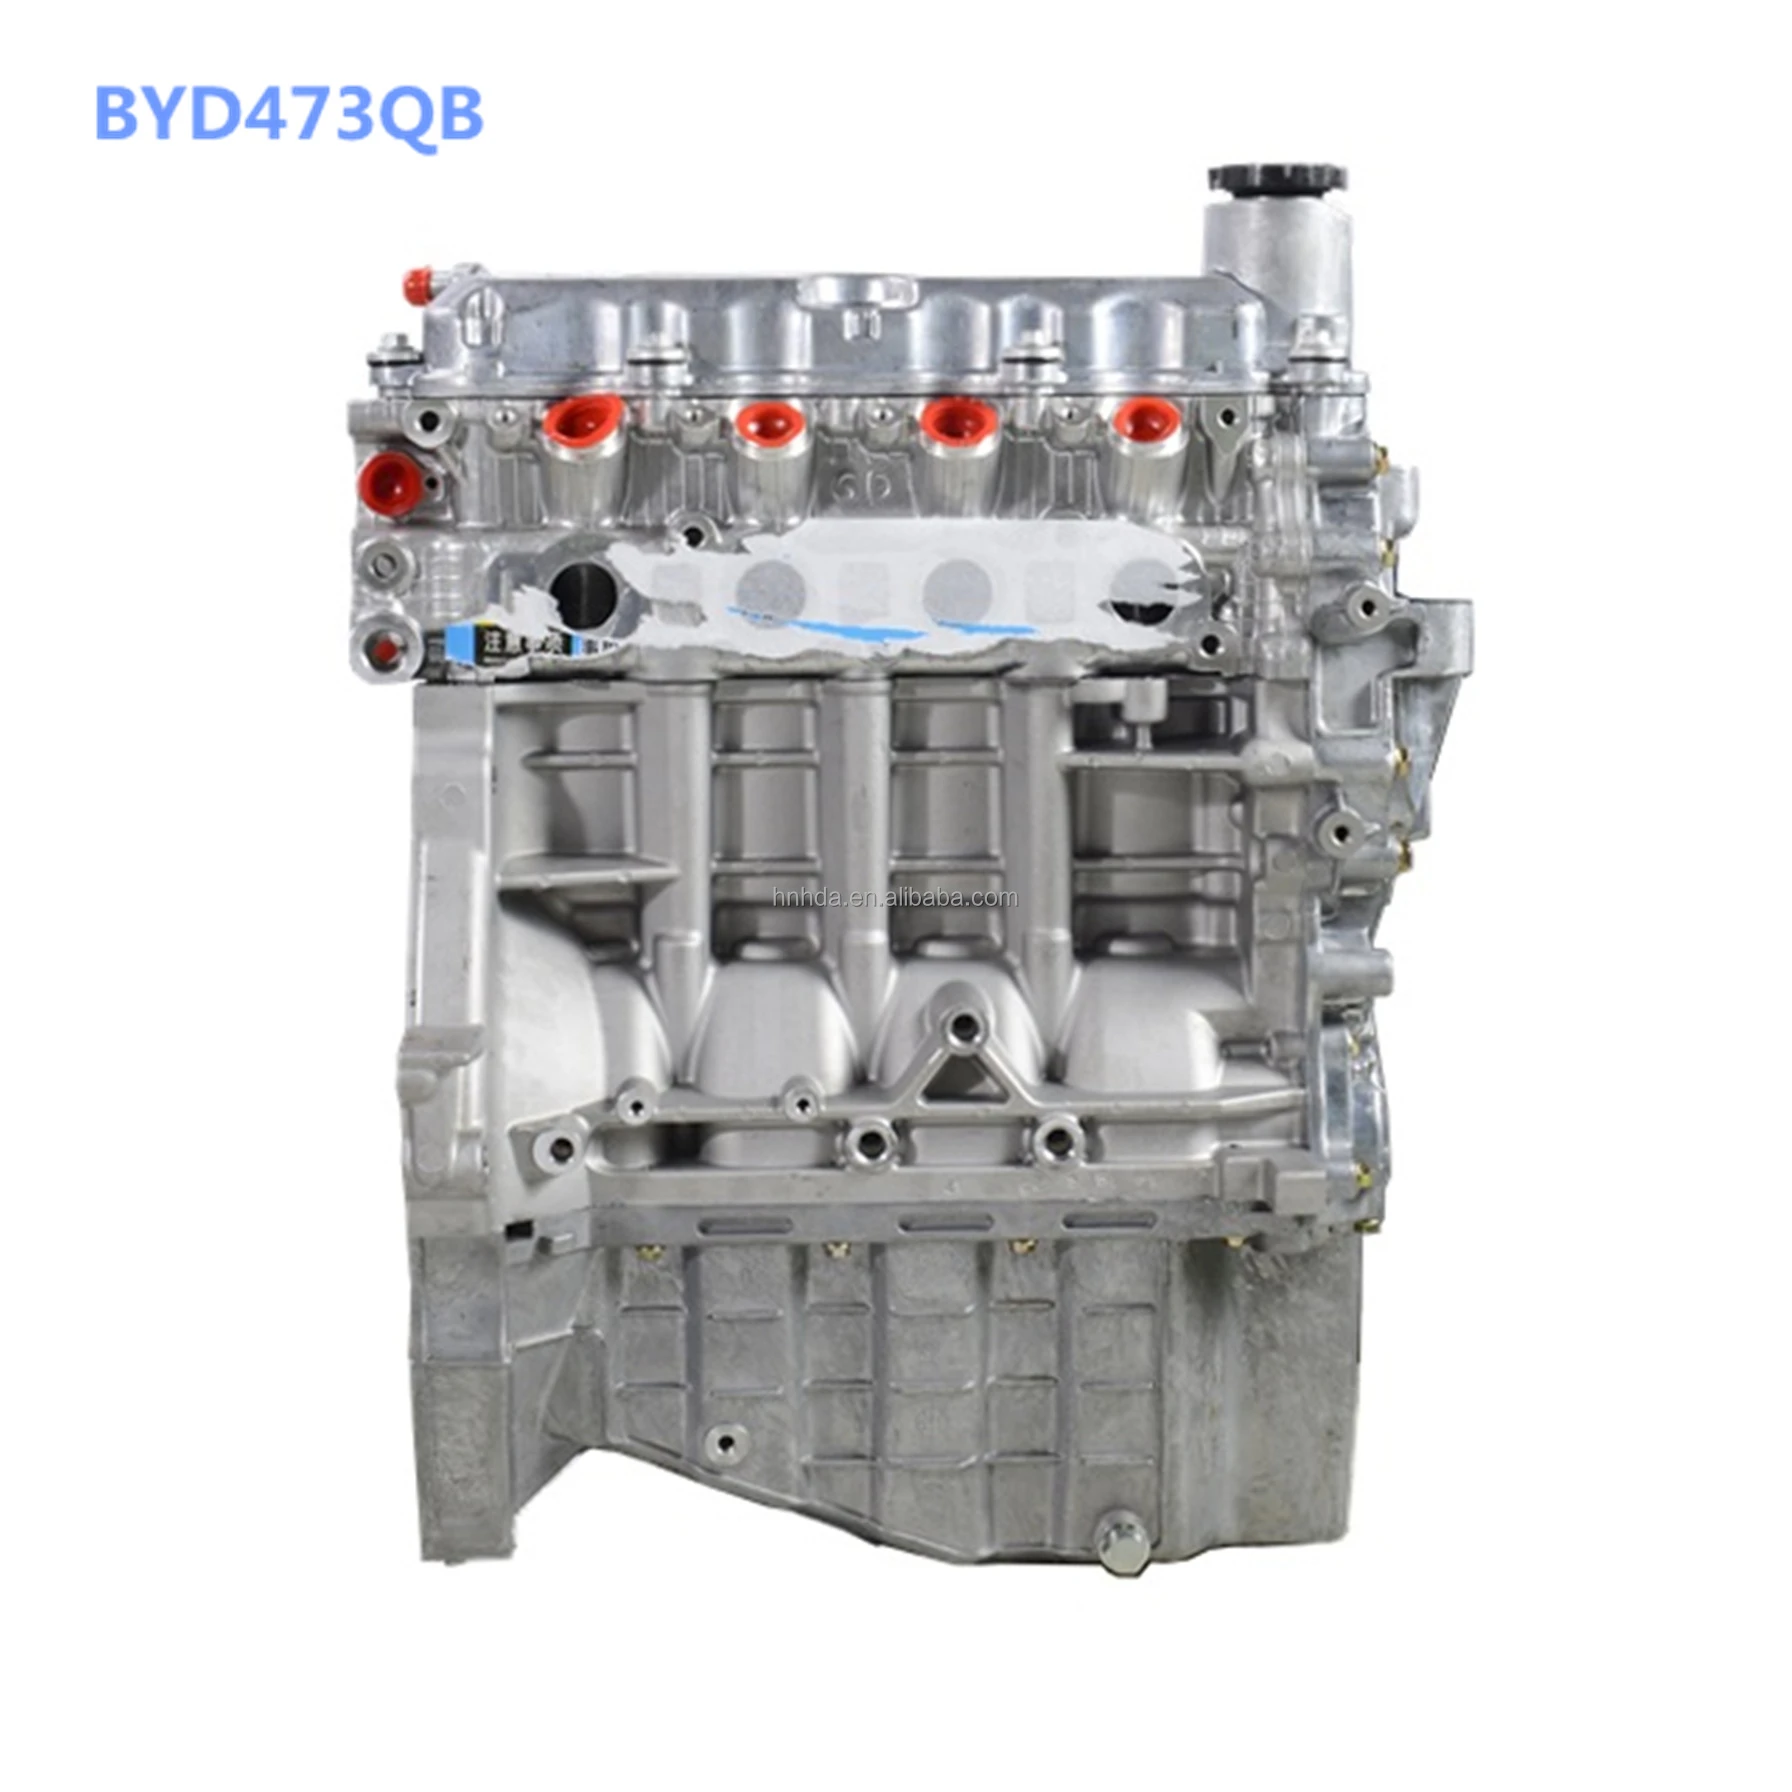 Original factory sales 473QB  Long block engine engine parts brand new for BYD engine assembly